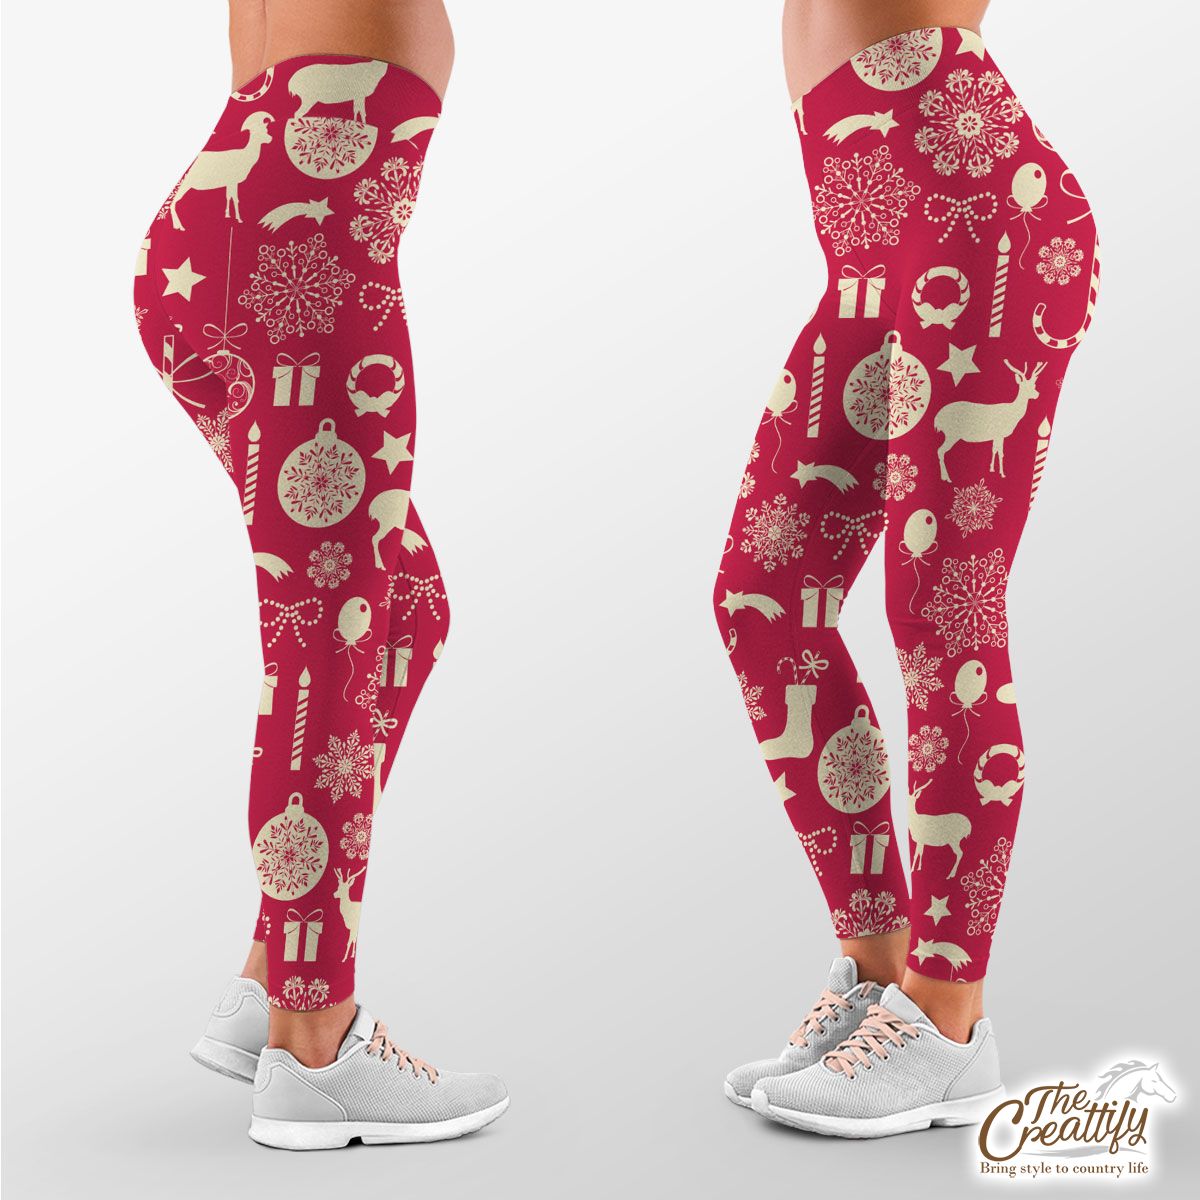 Happy Christmas With Reindeer, Christmas Balls, Socks, Candy Canes On Snowflake Background Legging